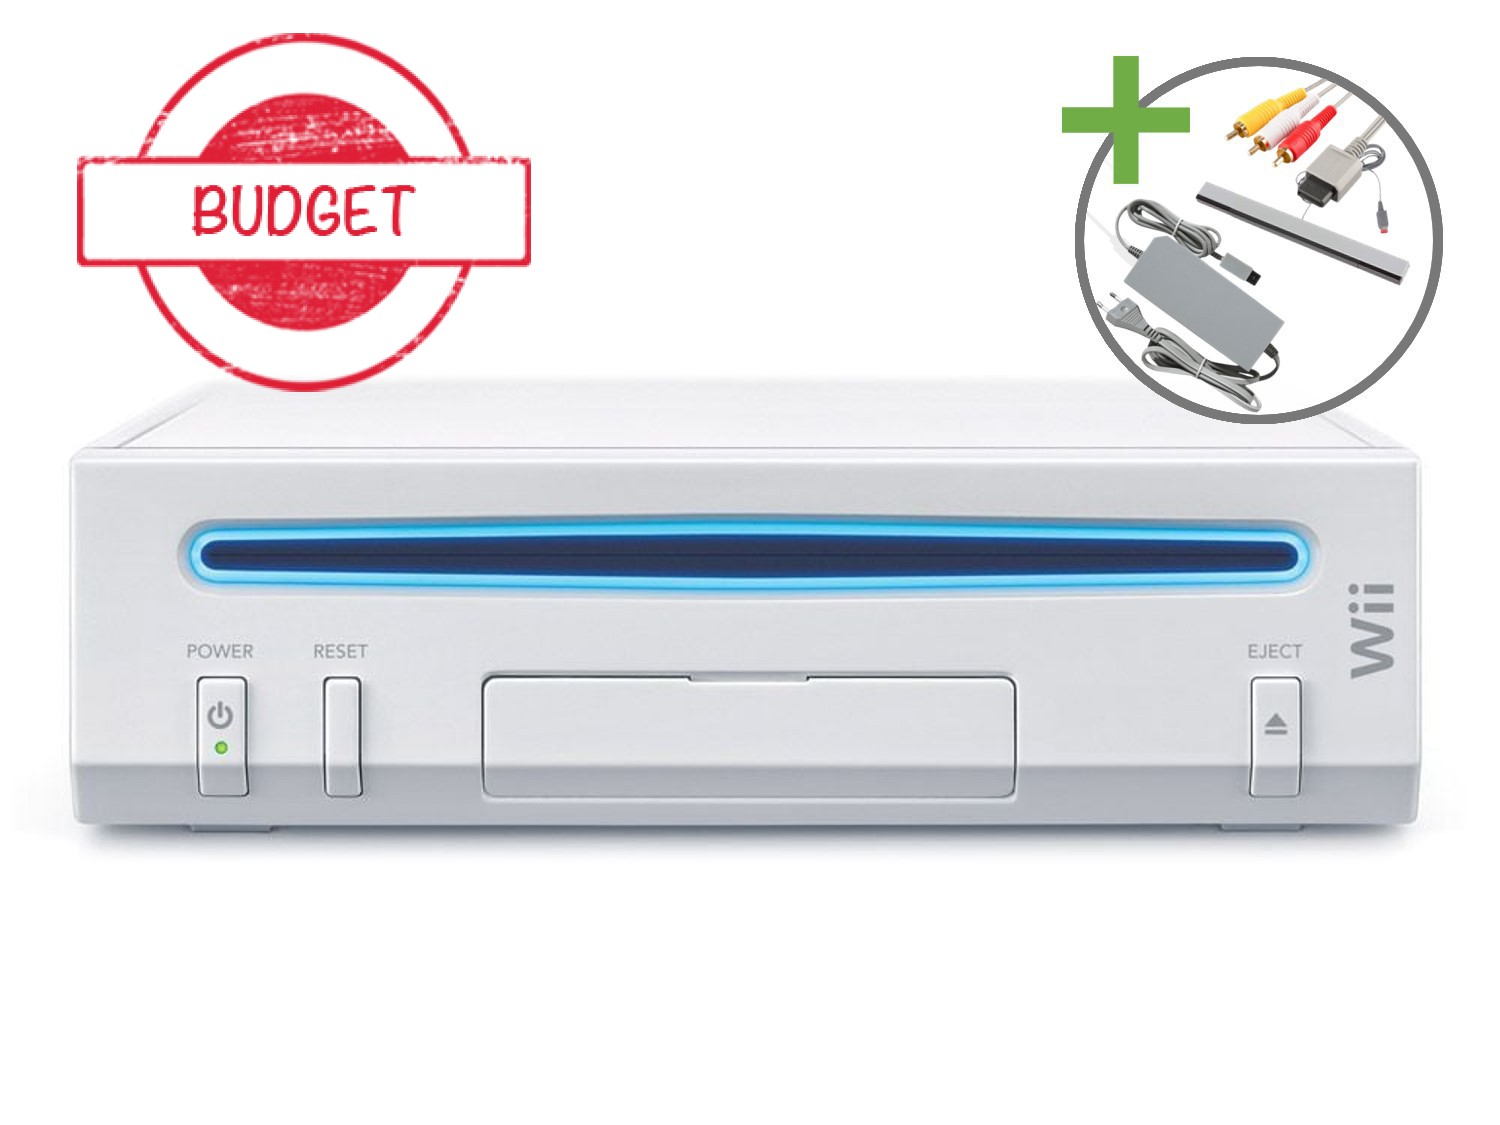 Nintendo Wii Starter Pack - The First of January Edition - Budget - Wii Hardware - 2